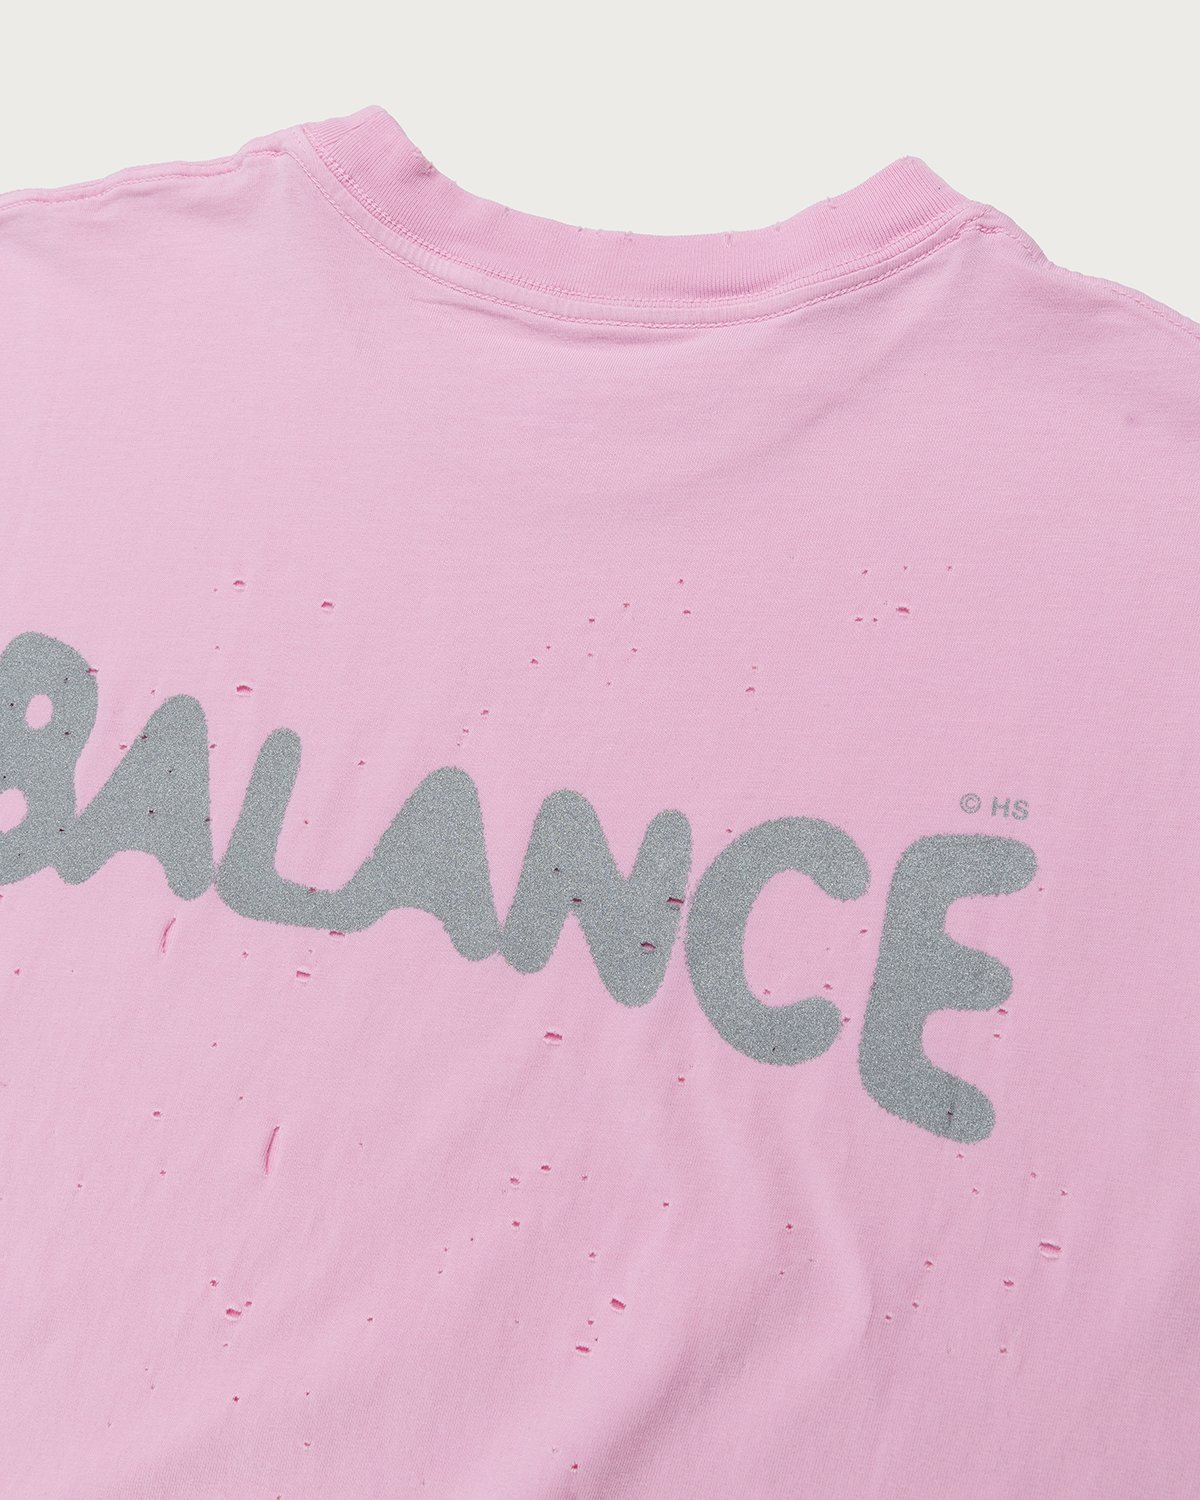 Satisfy x Highsnobiety - HS Sports Balance Muscle Tee Pink - Clothing - Pink - Image 3